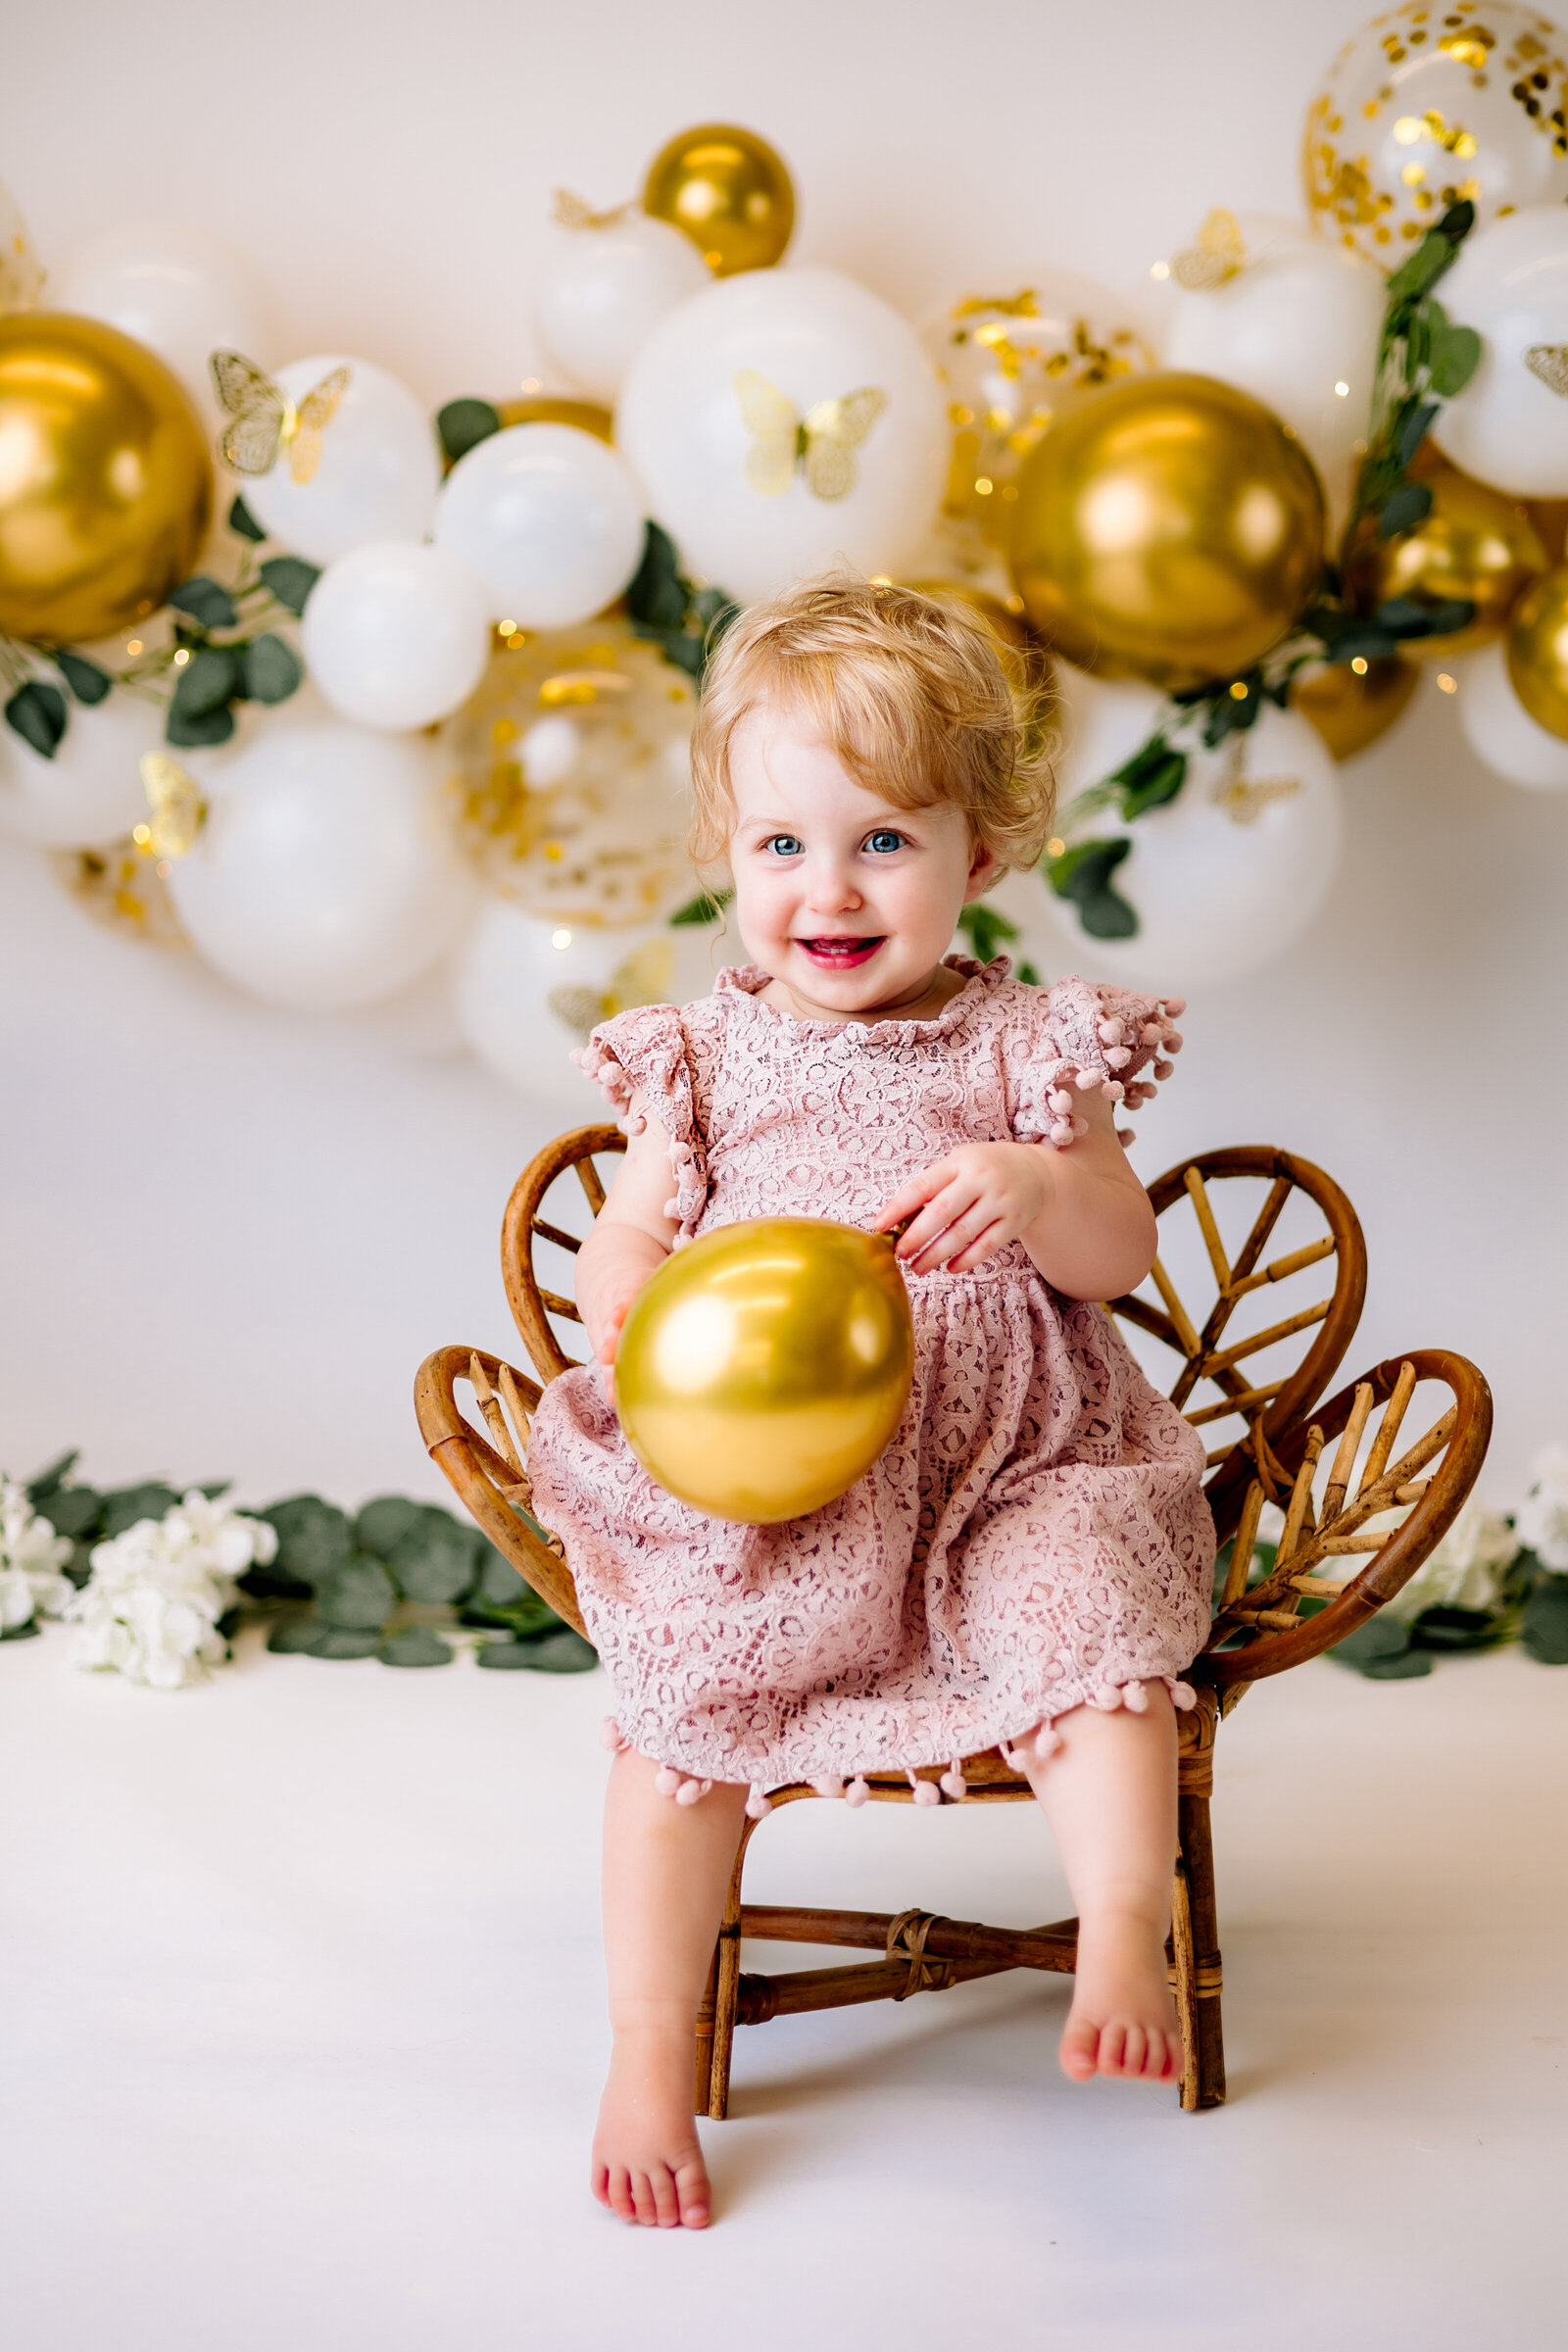 Sweet baby girl in a pink dress sits in an adorable rattan chair